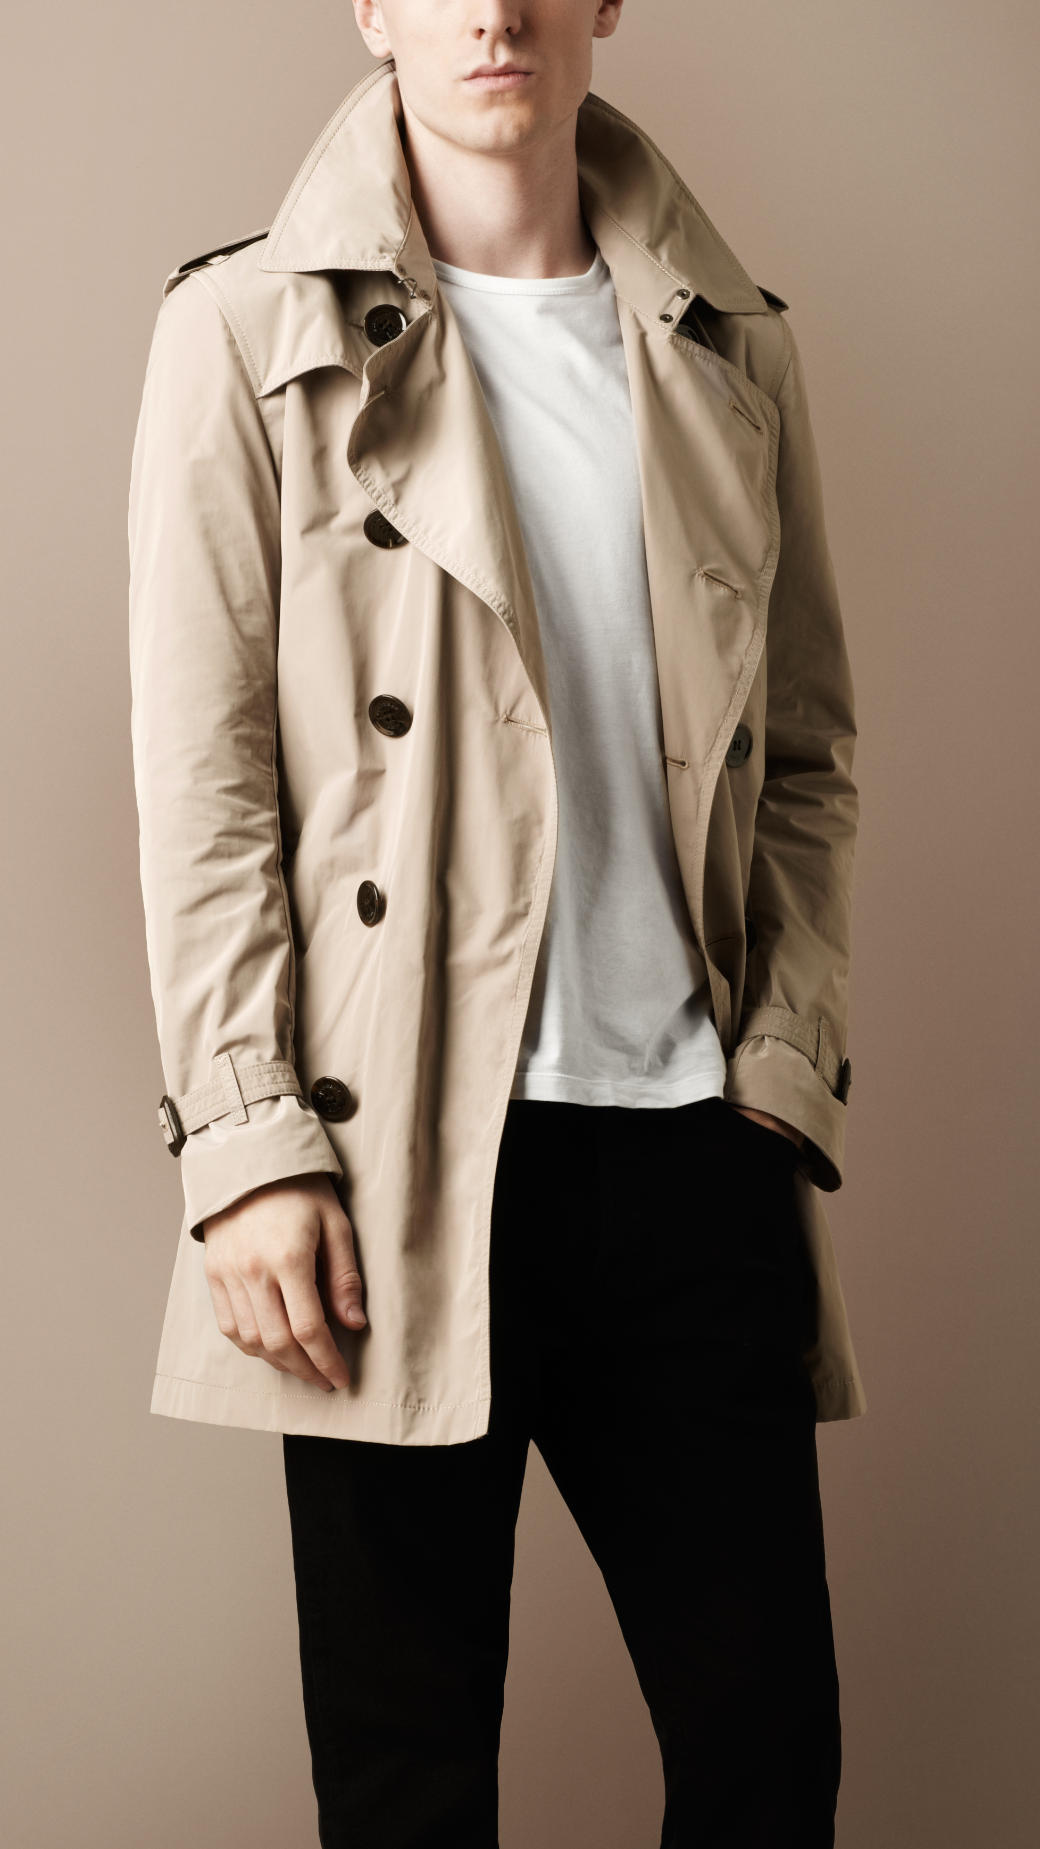 Pin by Julian Pereira on Personal Style | Trench coat men, Trench coat ...